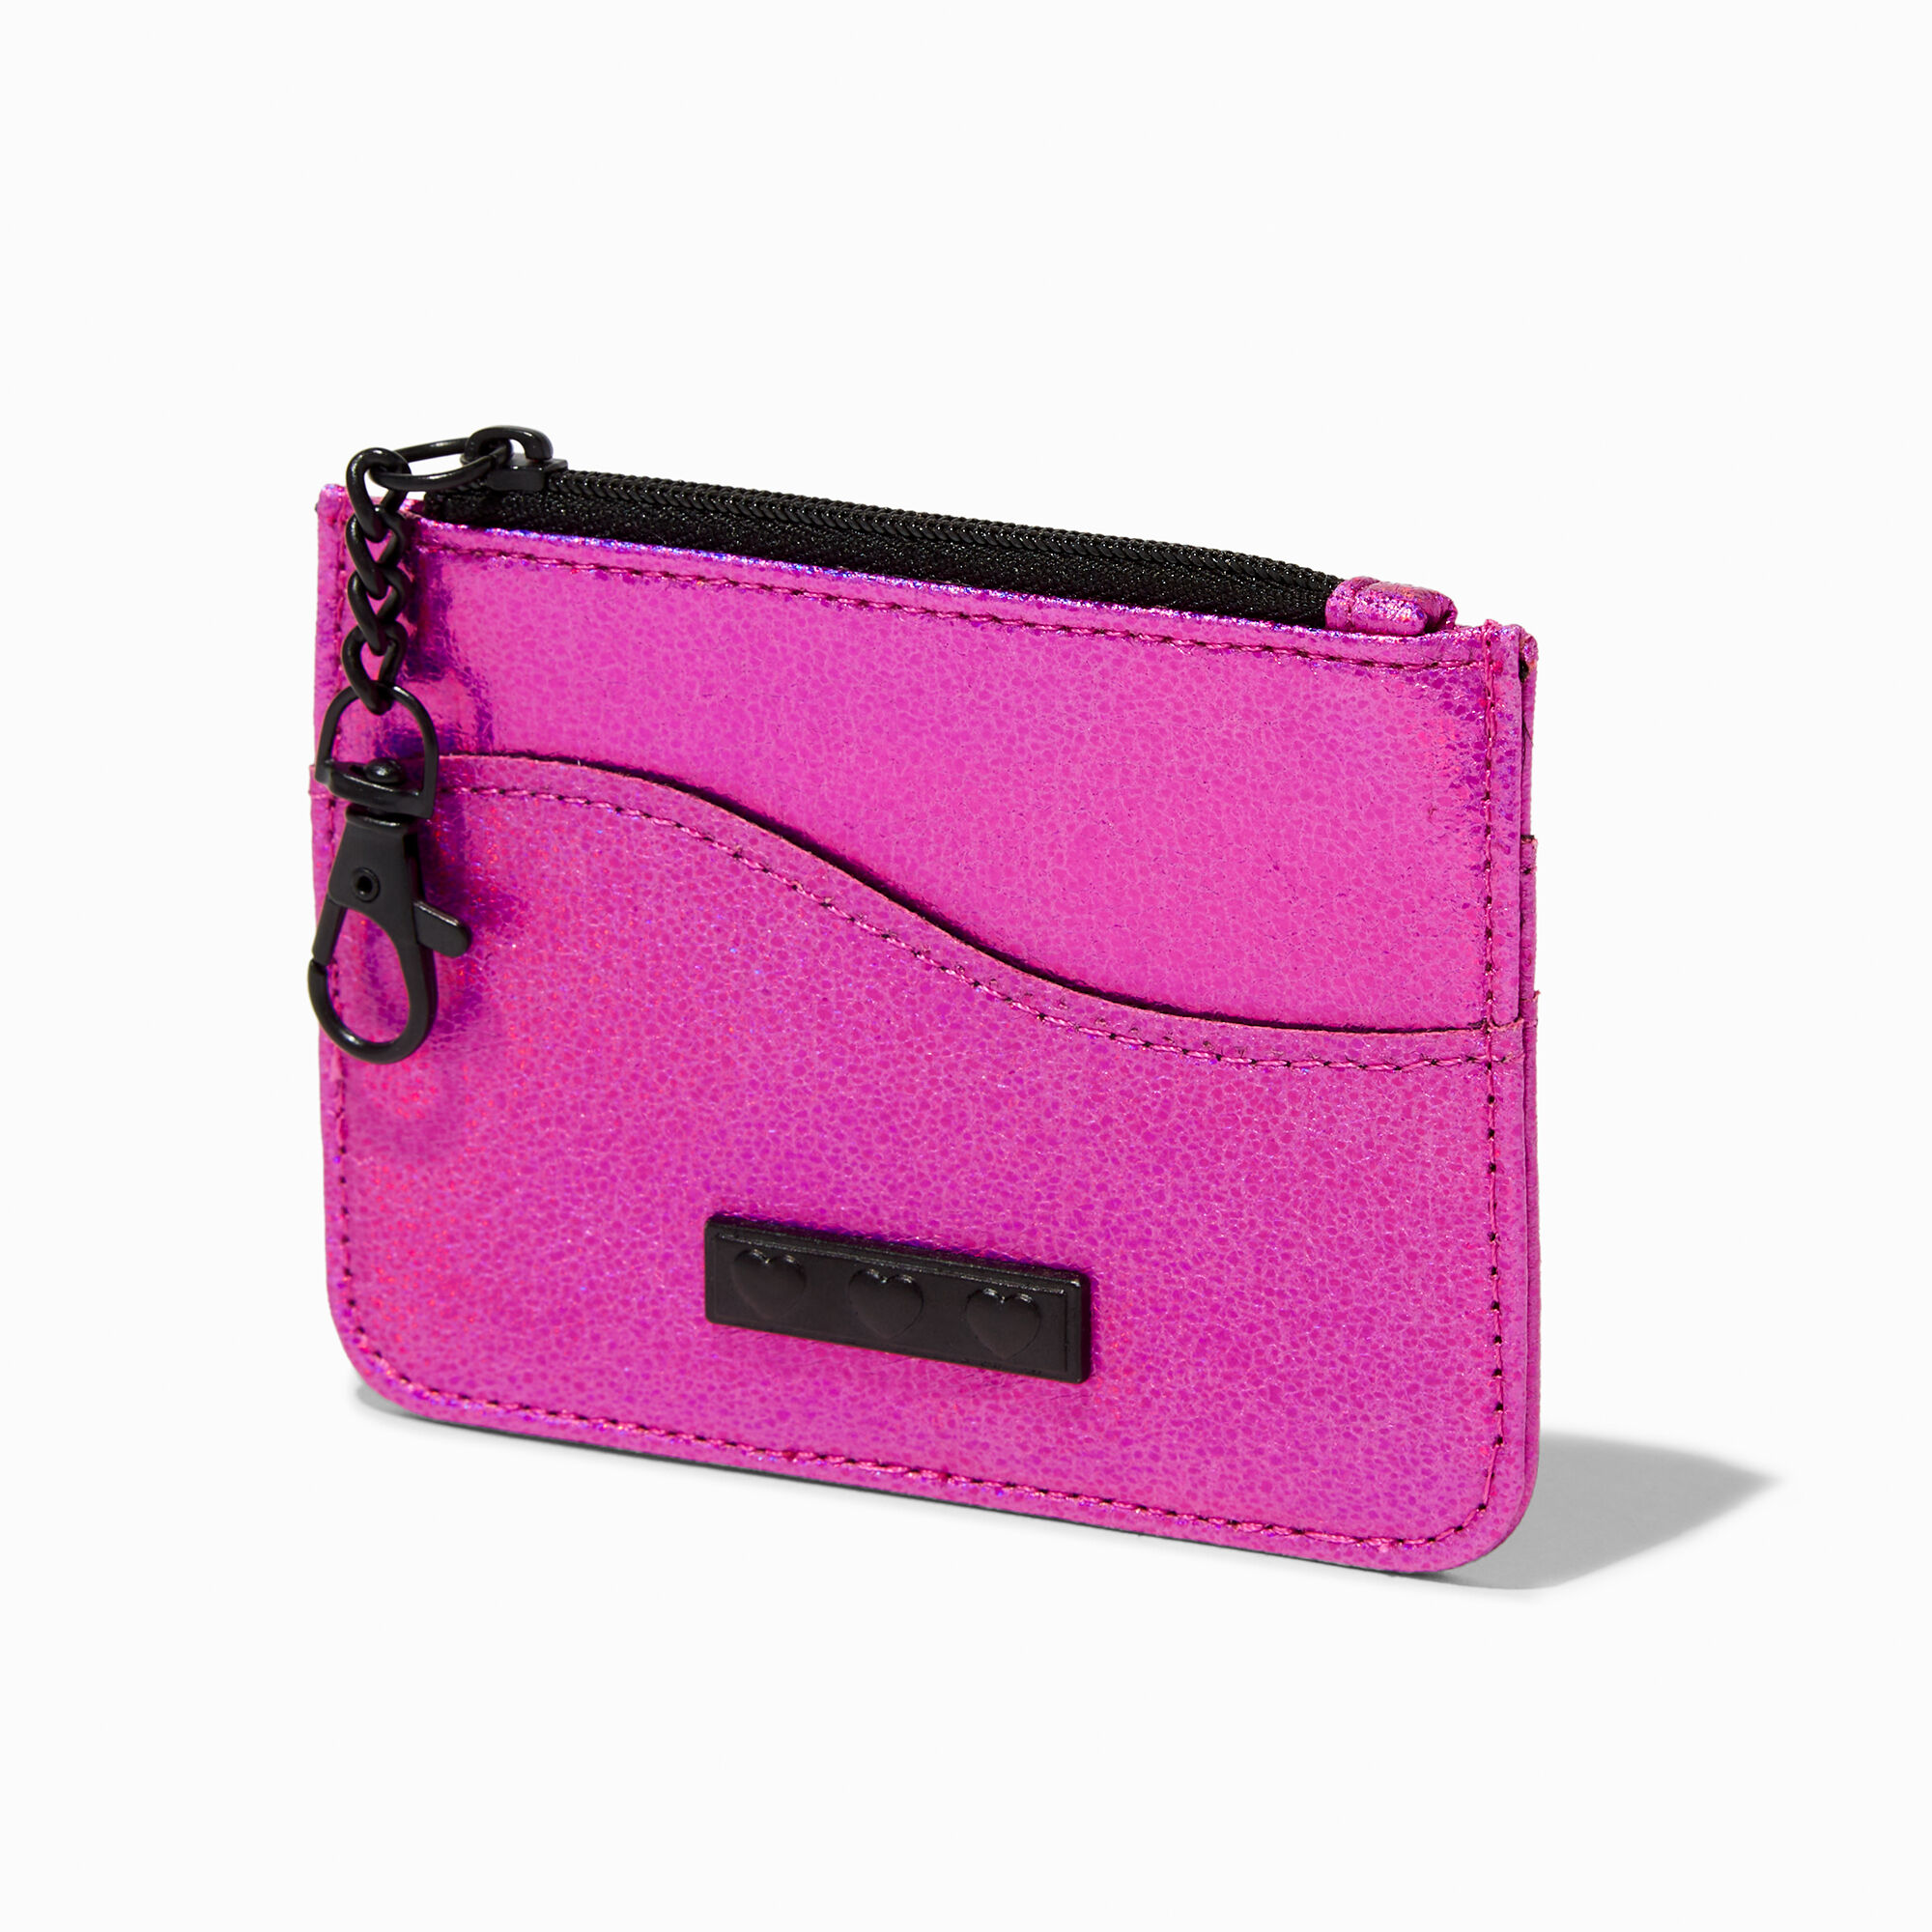 View Claires Card Wallet Pink information